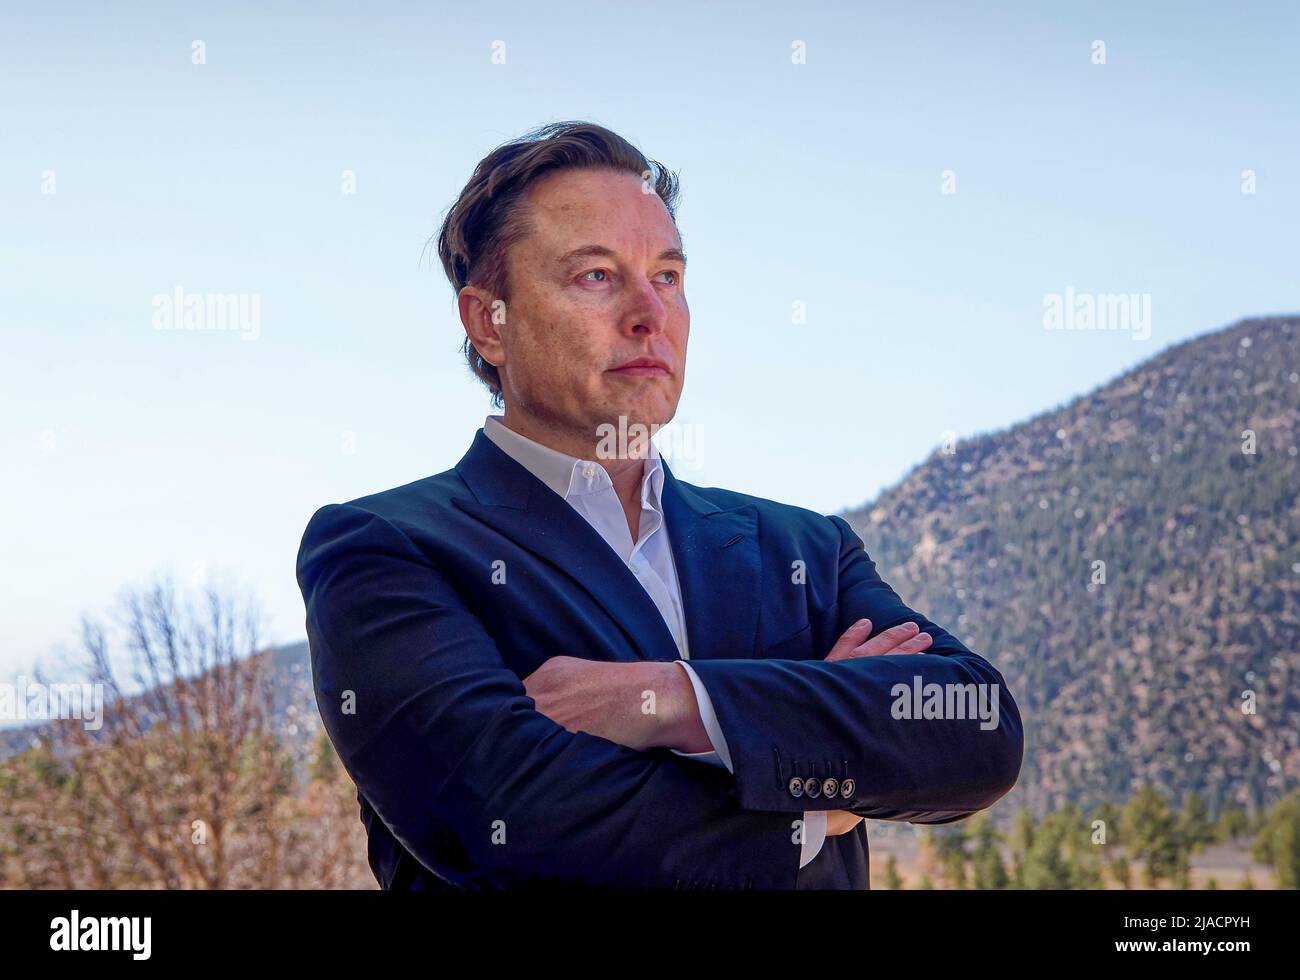 Elon Musk waits outside Arnold Hall before speaking to cadets on Thursday, April 7, 2022 at the United States Air Force Academy in Colorado Springs, El Paso County, CO, USA. Chief executive officer of electric vehicle manufacturer Tesla and space manufacturer SpaceX, Musk topped Forbes magazine's 2022 list of 'The World's Billionaires' with an estimated net worth of $219 billion, making him the world's wealthiest documented individual. (Apex MediaWire Photo by Trevor Cokley/U.S. Air Force) Stock Photo